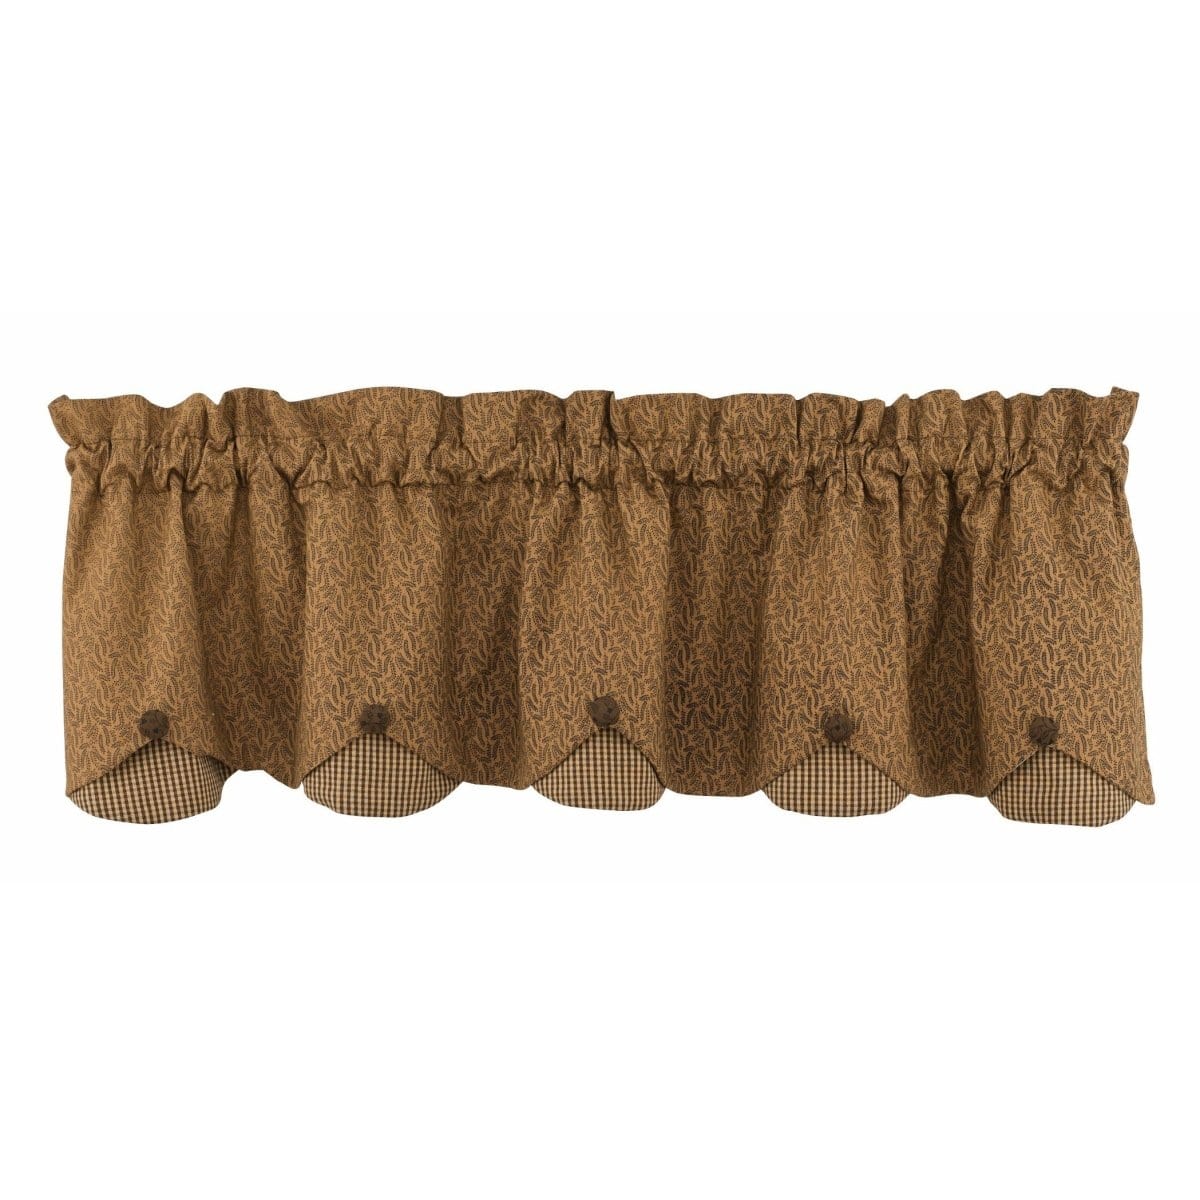 Shades Of Brown Scalloped Valance Lined-Park Designs-The Village Merchant